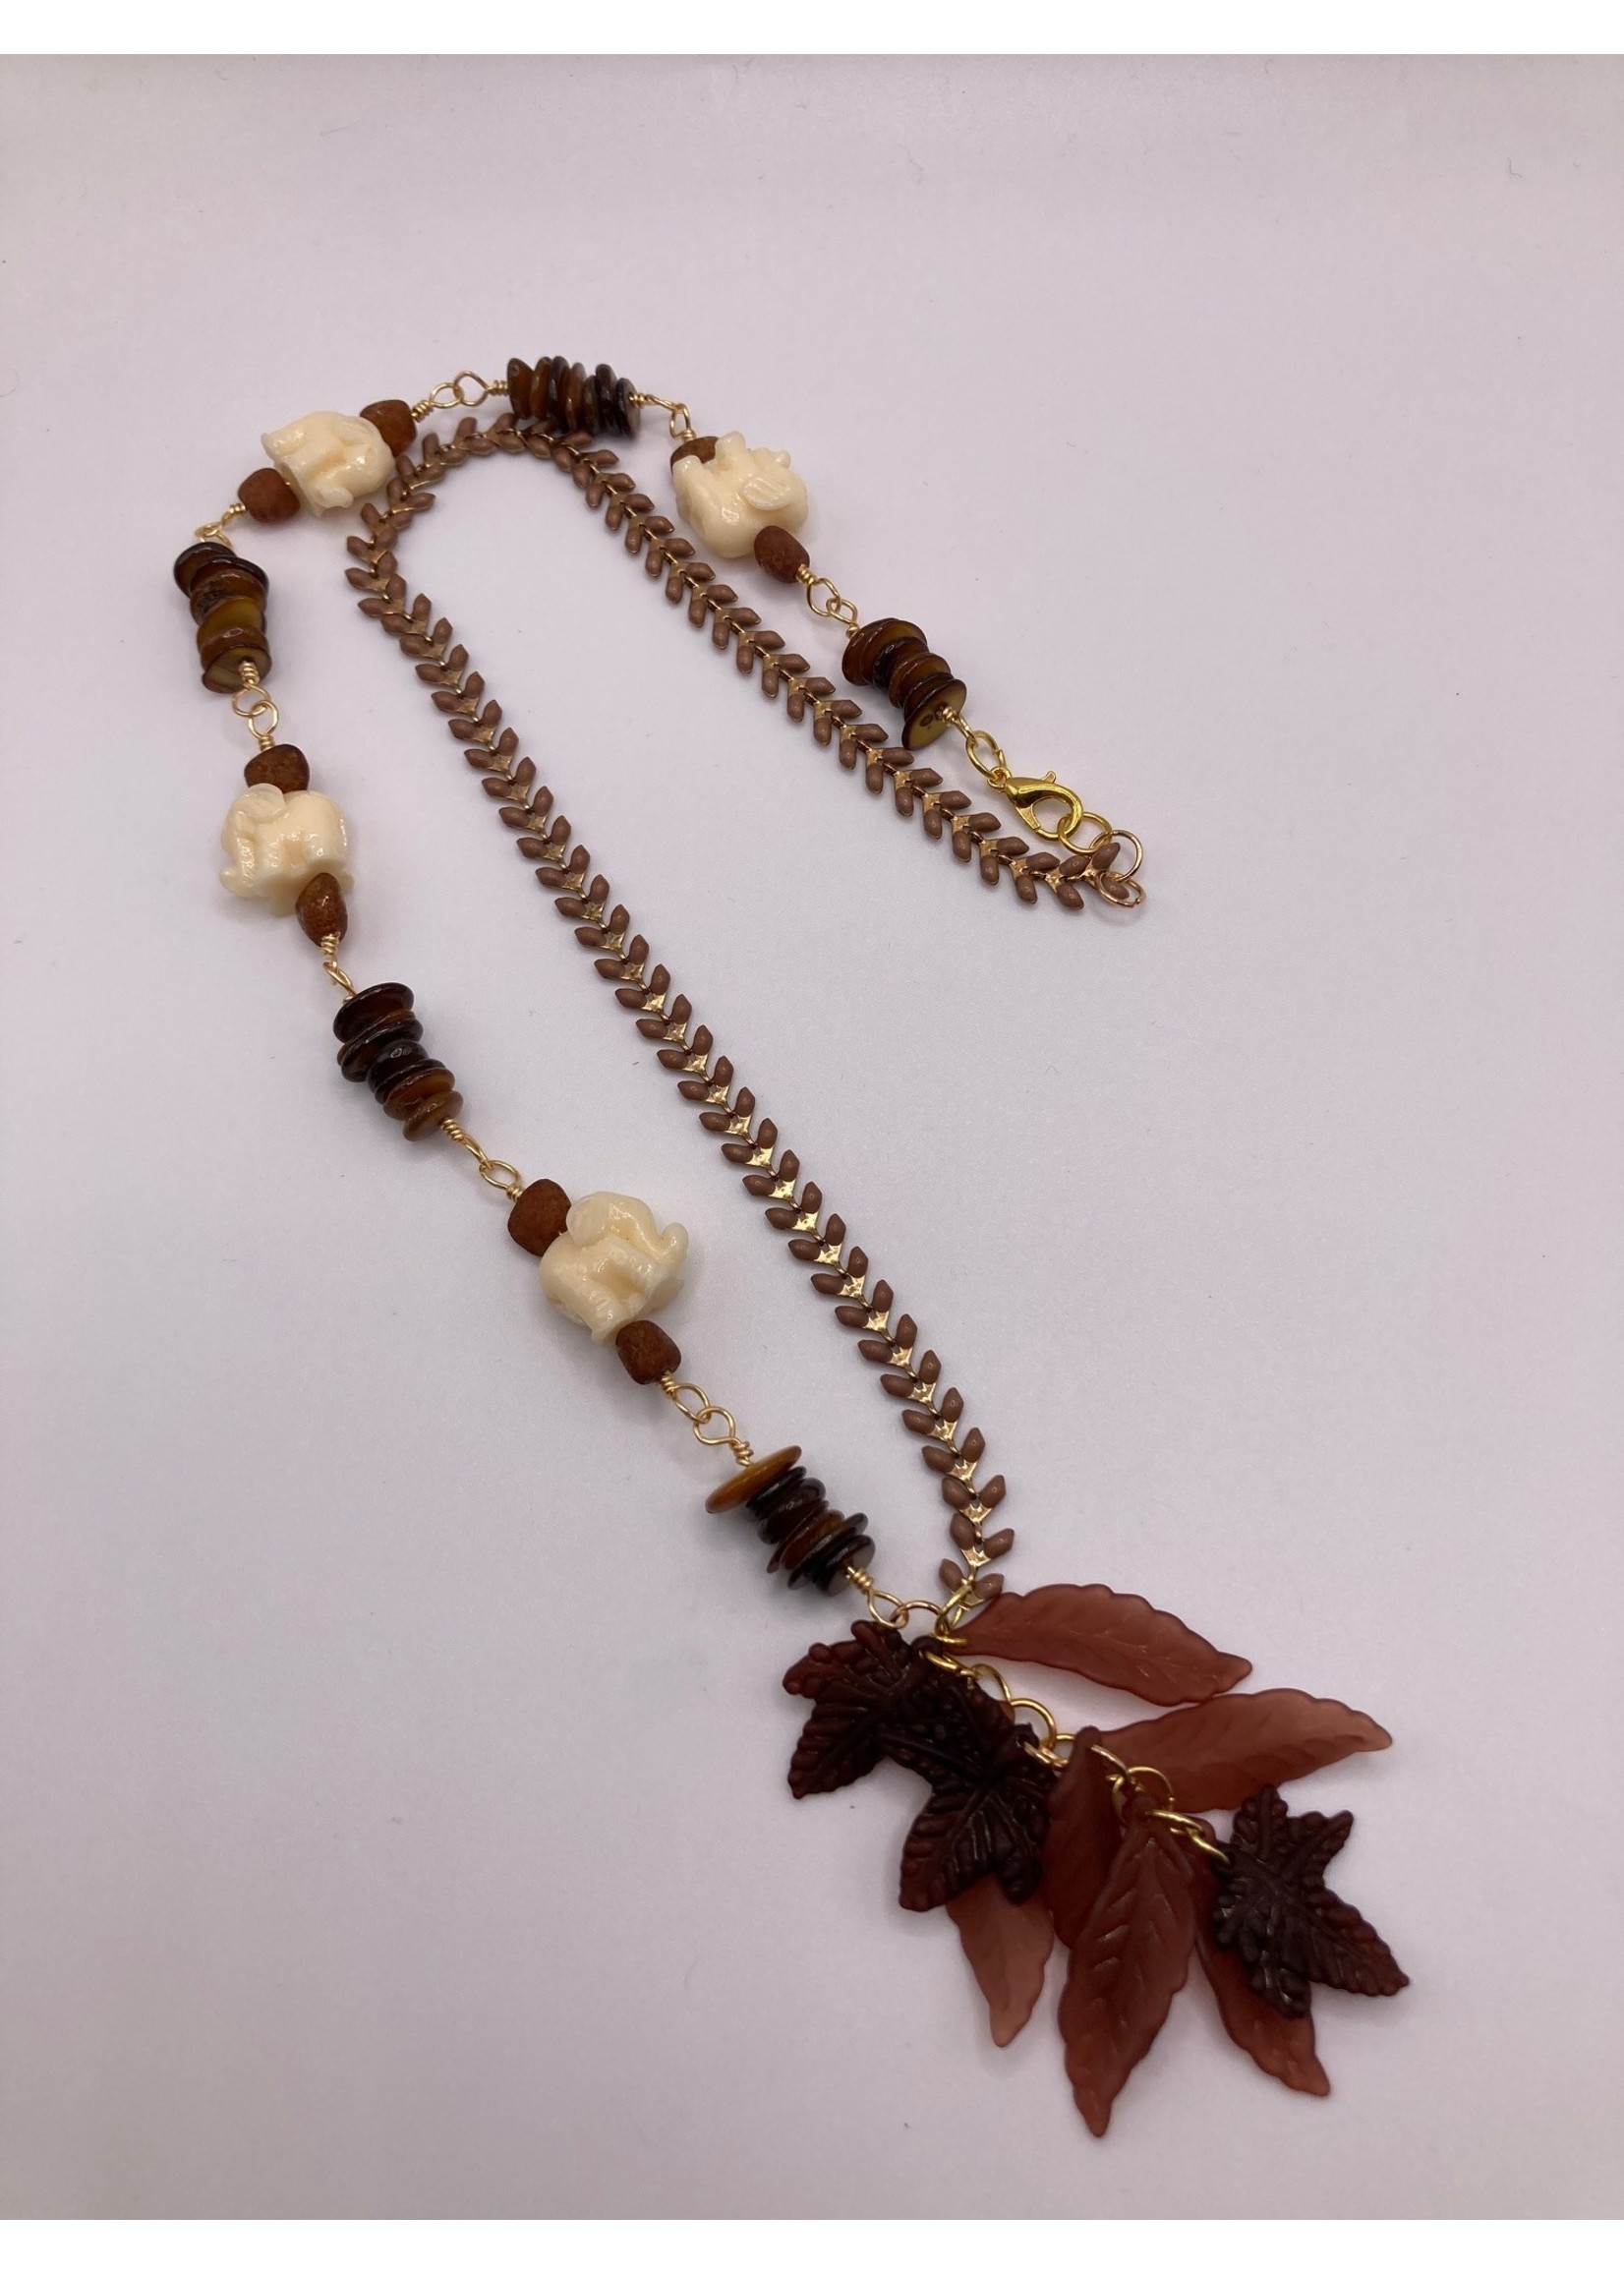 Our Twisted Dahlia Hanging leaves with Tigers Eye and Unakite, with Ivory Colored Elephant Beads and Chain Necklace